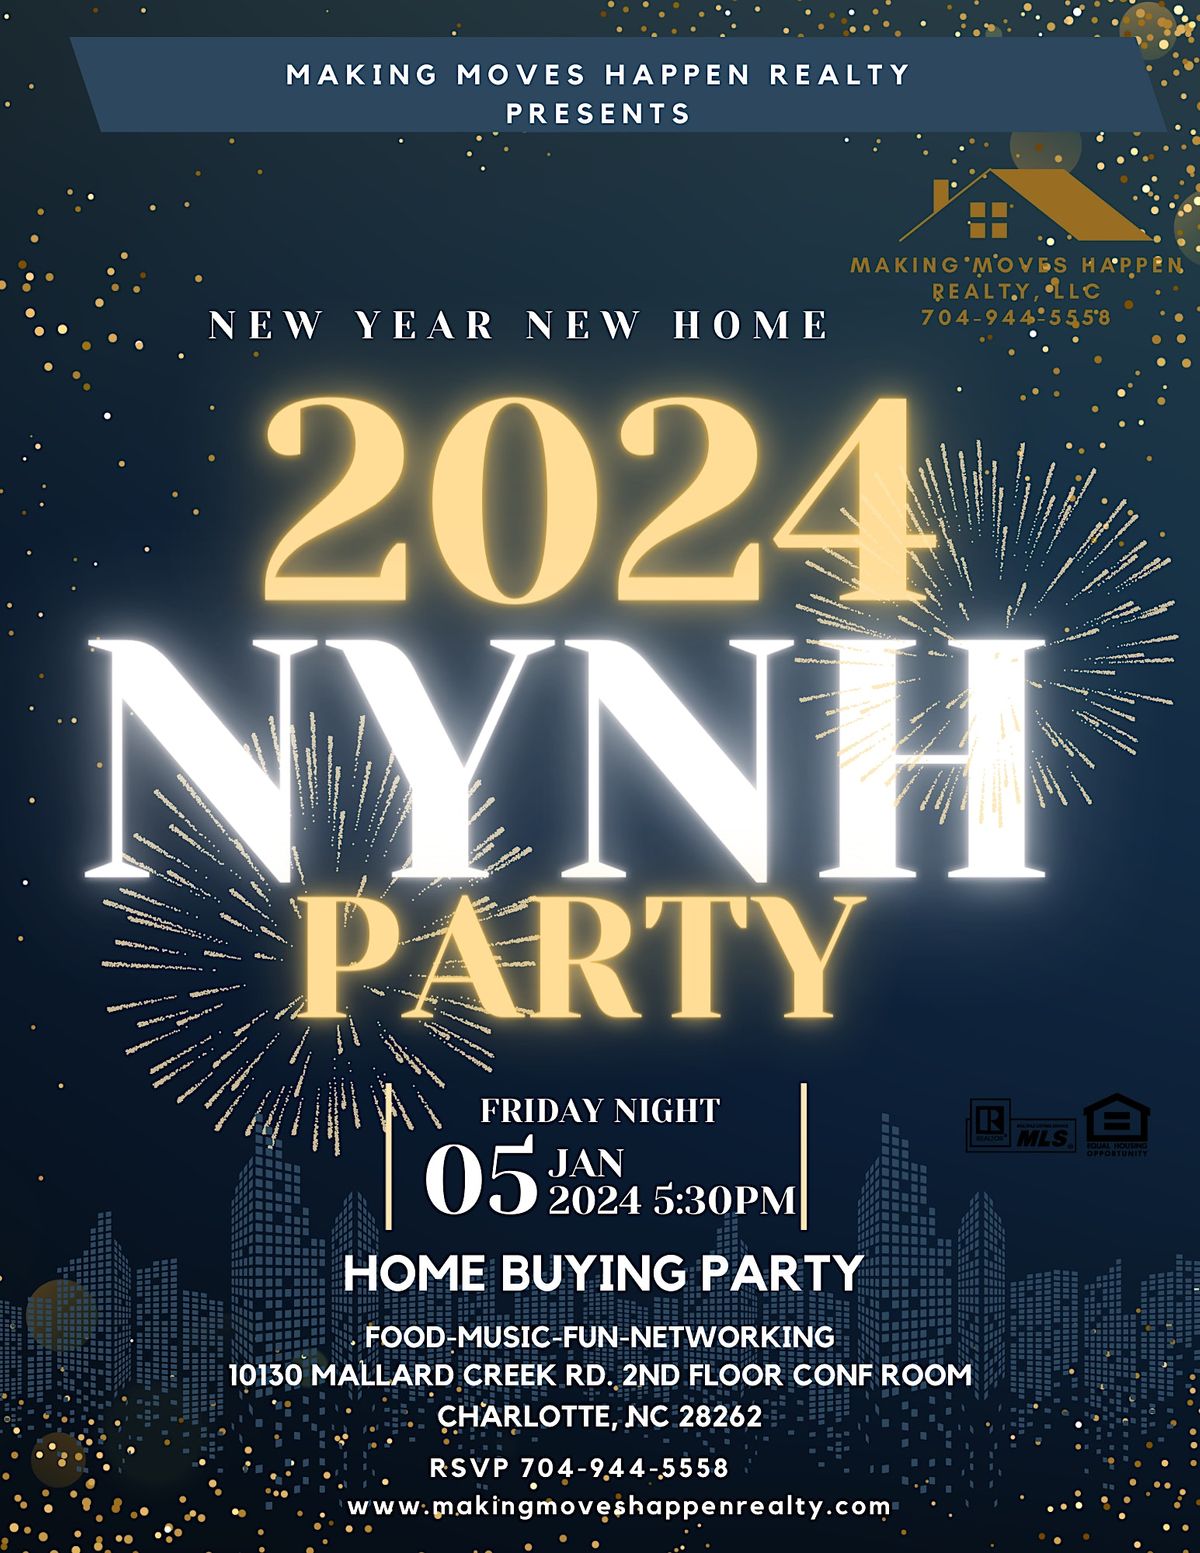 NEW YEAR NEW HOME 2024 PARTY